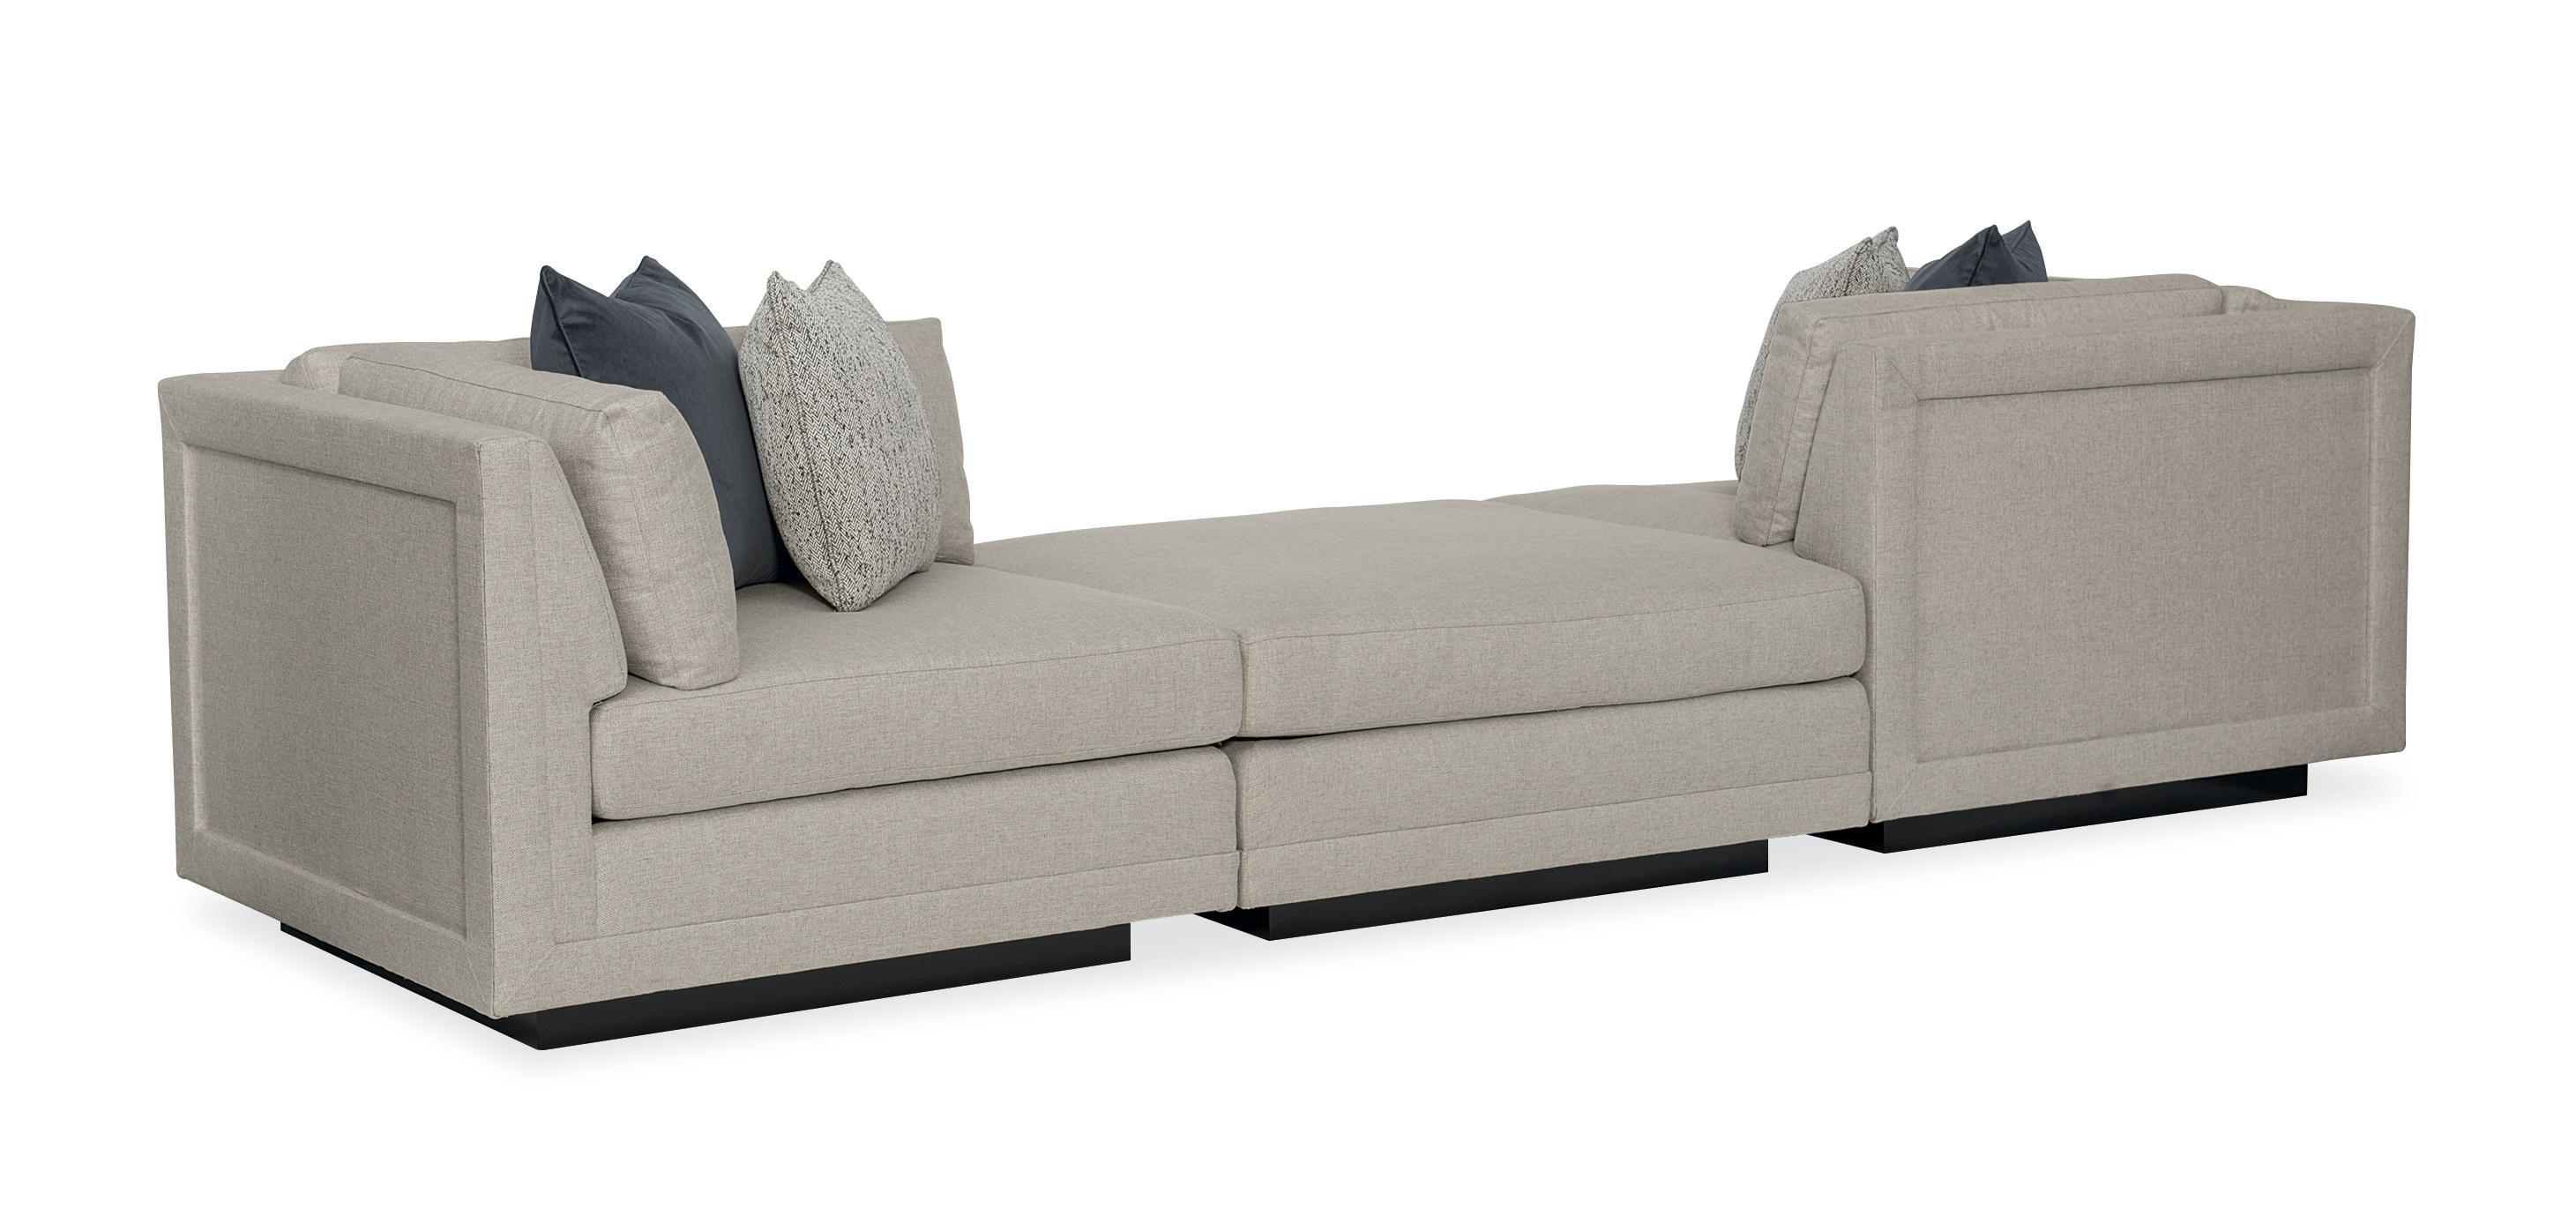 Contemporary Sectional Sofa Fusion 3 Piece Sectional M050-017-SEC3-A in Gray Fabric